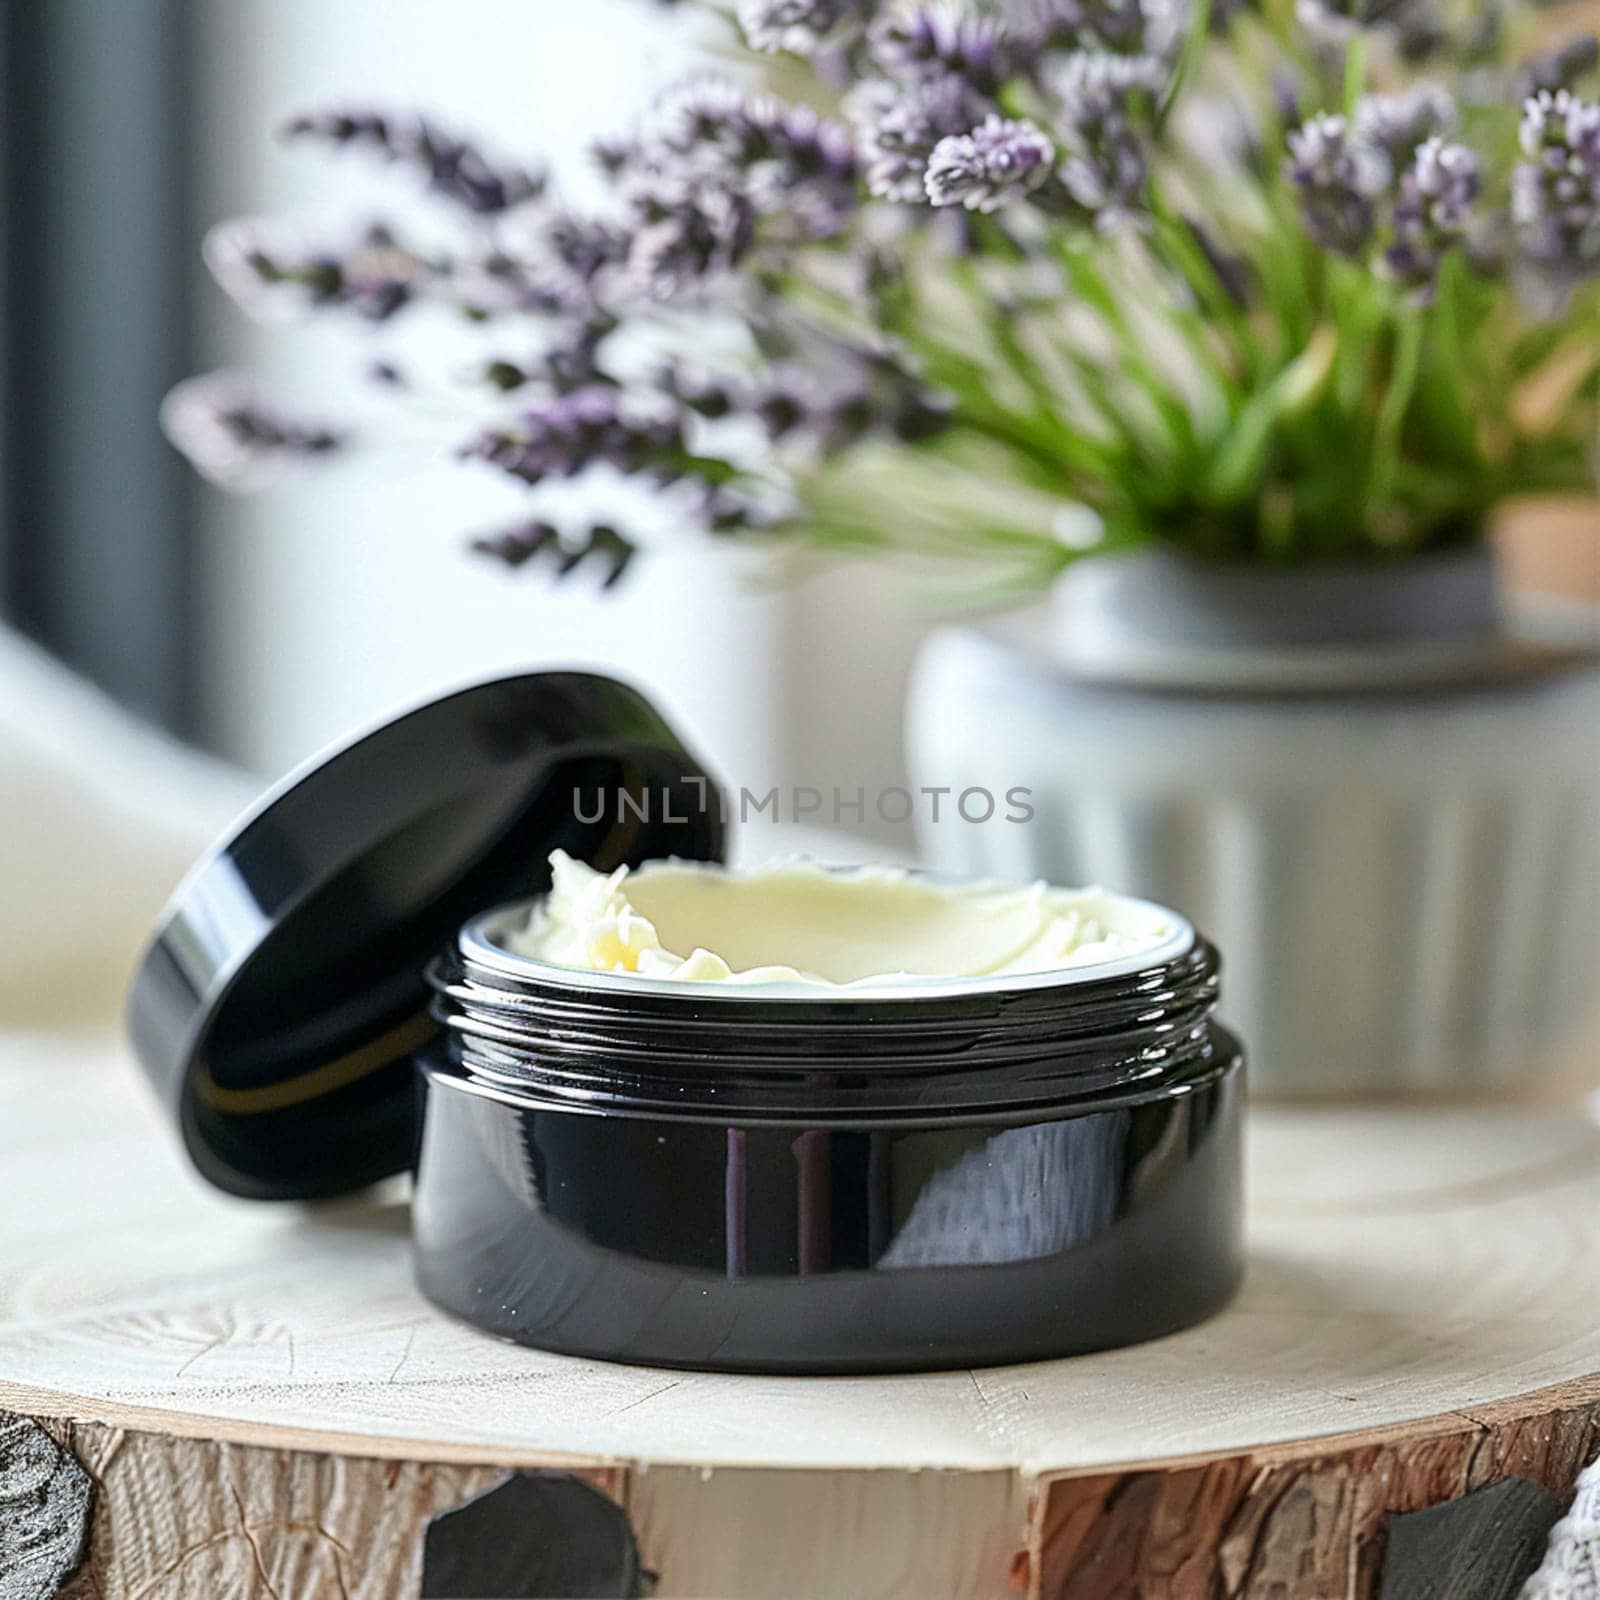 Face cream moisturiser, skincare and bodycare product, spa and organic beauty cosmetics for natural skin care routine by Anneleven